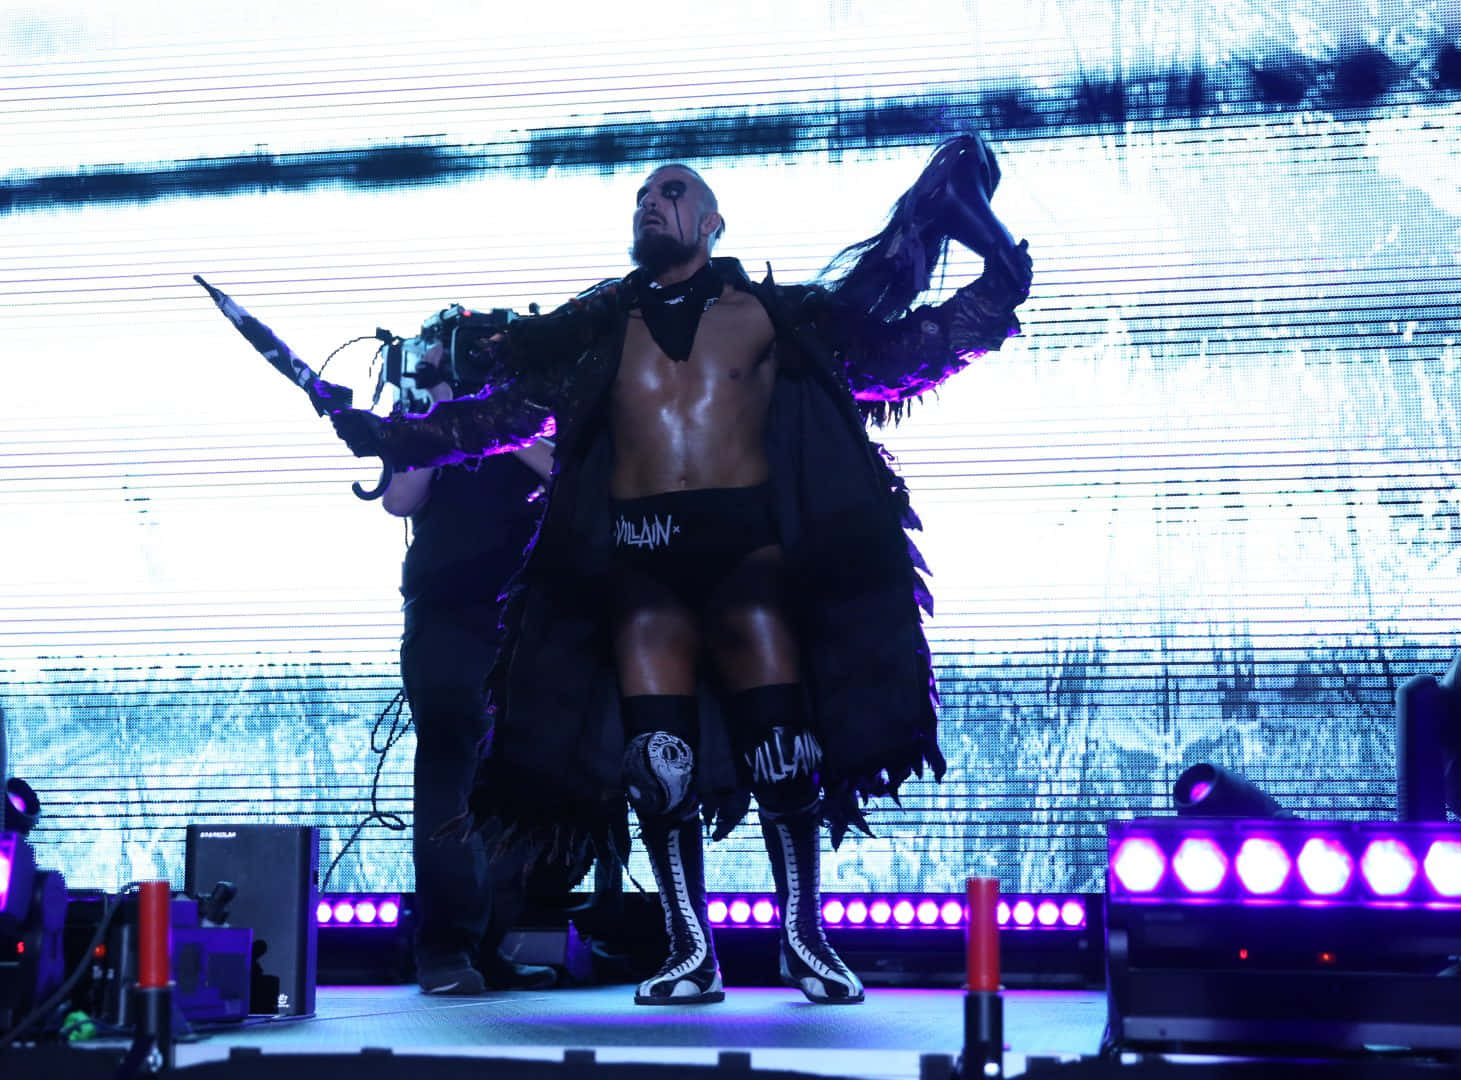 Caption: "Marty Scurll, Renowned English ROH Wrestler, Making His Grand Entrance On Stage" Wallpaper